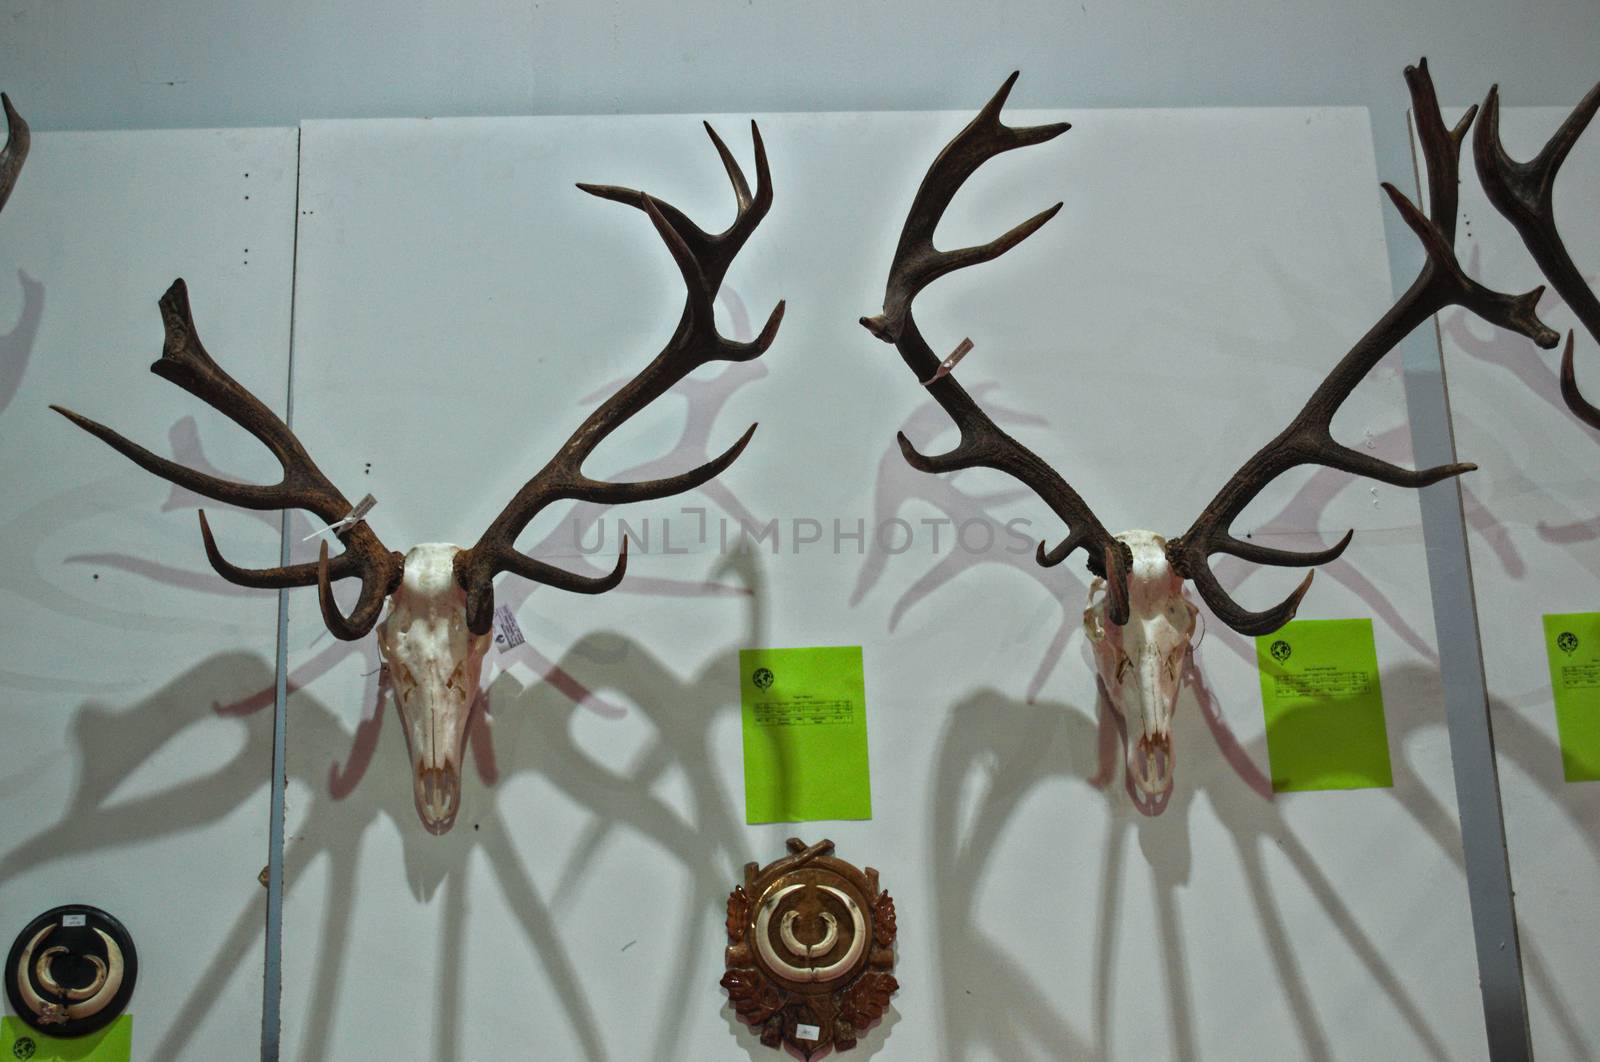 Exhibition of animal hunting trophies on wall by sheriffkule